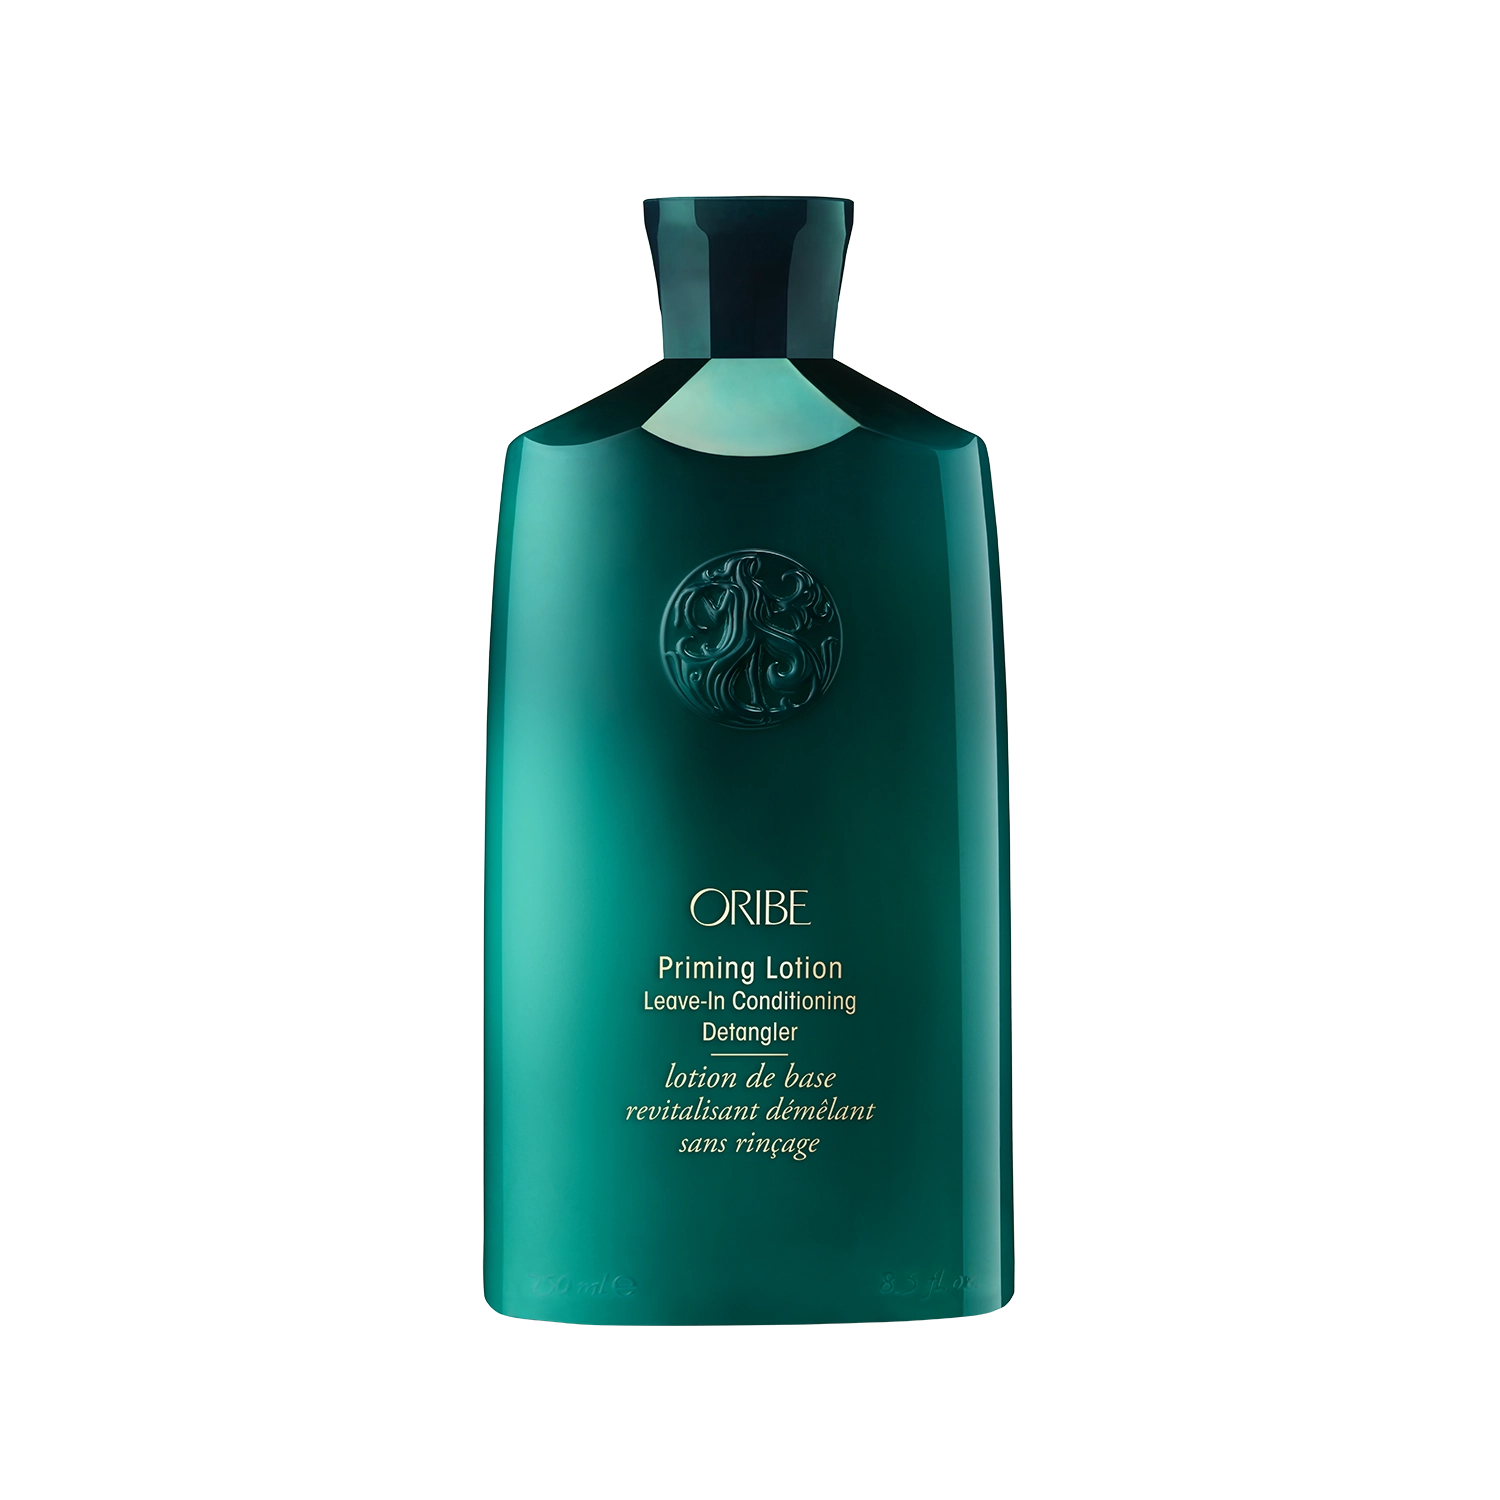 ORIBE - Leave-in conditioning detangling base lotion (250ml)